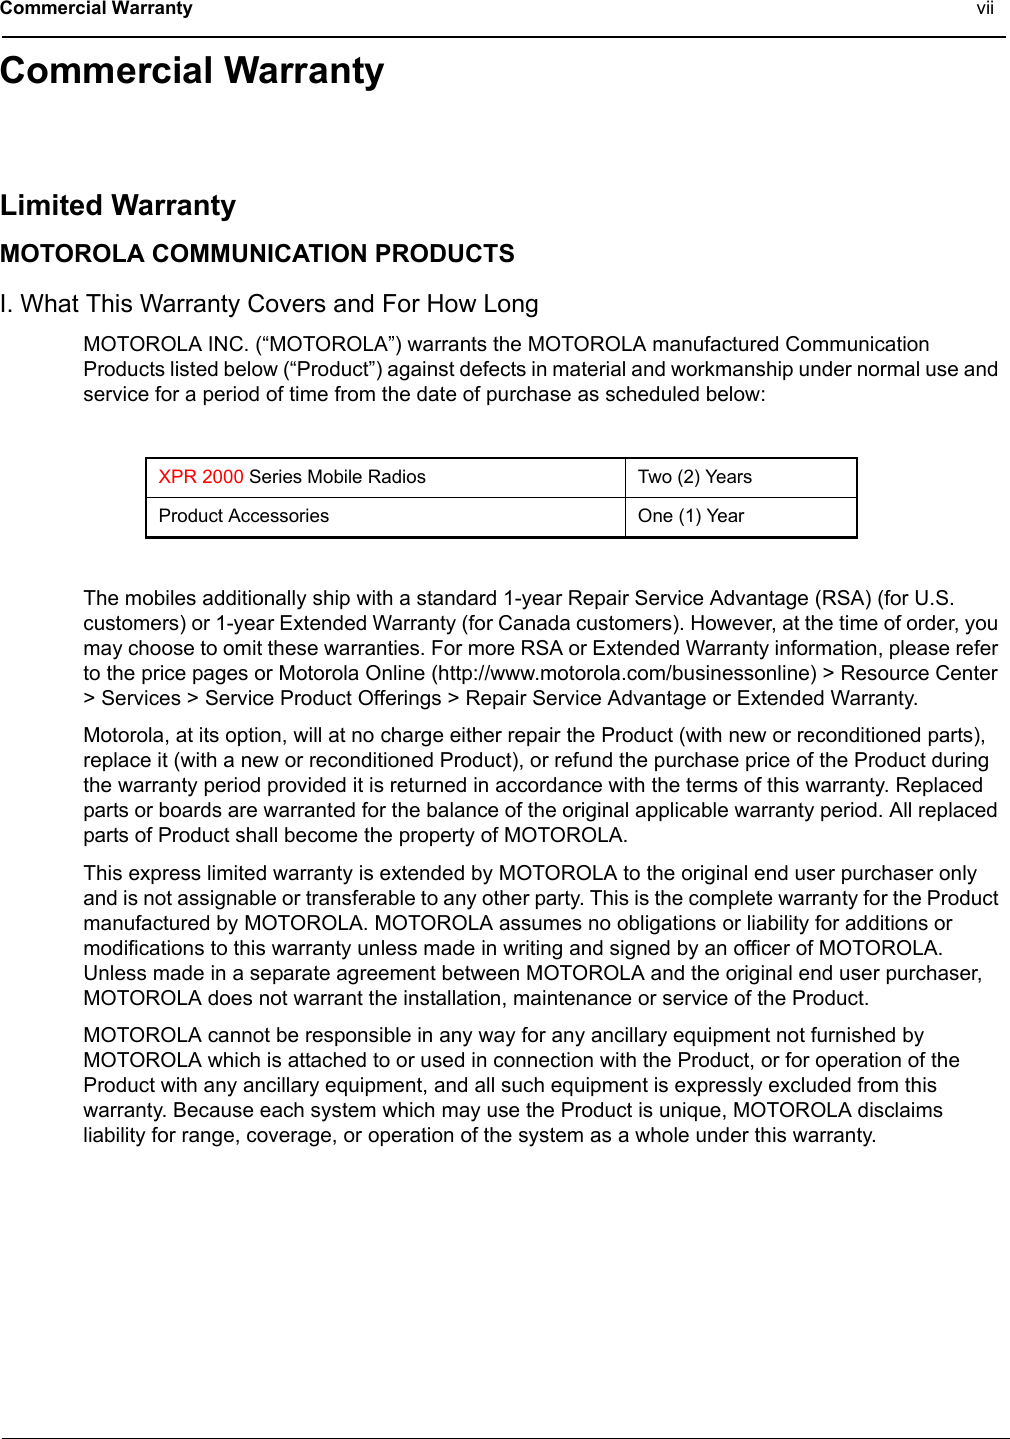 Commercial Warranty viiCommercial WarrantyLimited WarrantyMOTOROLA COMMUNICATION PRODUCTSI. What This Warranty Covers and For How LongMOTOROLA INC. (“MOTOROLA”) warrants the MOTOROLA manufactured Communication Products listed below (“Product”) against defects in material and workmanship under normal use and service for a period of time from the date of purchase as scheduled below:The mobiles additionally ship with a standard 1-year Repair Service Advantage (RSA) (for U.S. customers) or 1-year Extended Warranty (for Canada customers). However, at the time of order, you may choose to omit these warranties. For more RSA or Extended Warranty information, please refer to the price pages or Motorola Online (http://www.motorola.com/businessonline) &gt; Resource Center &gt; Services &gt; Service Product Offerings &gt; Repair Service Advantage or Extended Warranty.Motorola, at its option, will at no charge either repair the Product (with new or reconditioned parts), replace it (with a new or reconditioned Product), or refund the purchase price of the Product during the warranty period provided it is returned in accordance with the terms of this warranty. Replaced parts or boards are warranted for the balance of the original applicable warranty period. All replaced parts of Product shall become the property of MOTOROLA.This express limited warranty is extended by MOTOROLA to the original end user purchaser only and is not assignable or transferable to any other party. This is the complete warranty for the Product manufactured by MOTOROLA. MOTOROLA assumes no obligations or liability for additions or modifications to this warranty unless made in writing and signed by an officer of MOTOROLA. Unless made in a separate agreement between MOTOROLA and the original end user purchaser, MOTOROLA does not warrant the installation, maintenance or service of the Product.MOTOROLA cannot be responsible in any way for any ancillary equipment not furnished by MOTOROLA which is attached to or used in connection with the Product, or for operation of the Product with any ancillary equipment, and all such equipment is expressly excluded from this warranty. Because each system which may use the Product is unique, MOTOROLA disclaims liability for range, coverage, or operation of the system as a whole under this warranty.XPR 2000 Series Mobile Radios Two (2) YearsProduct Accessories One (1) Year